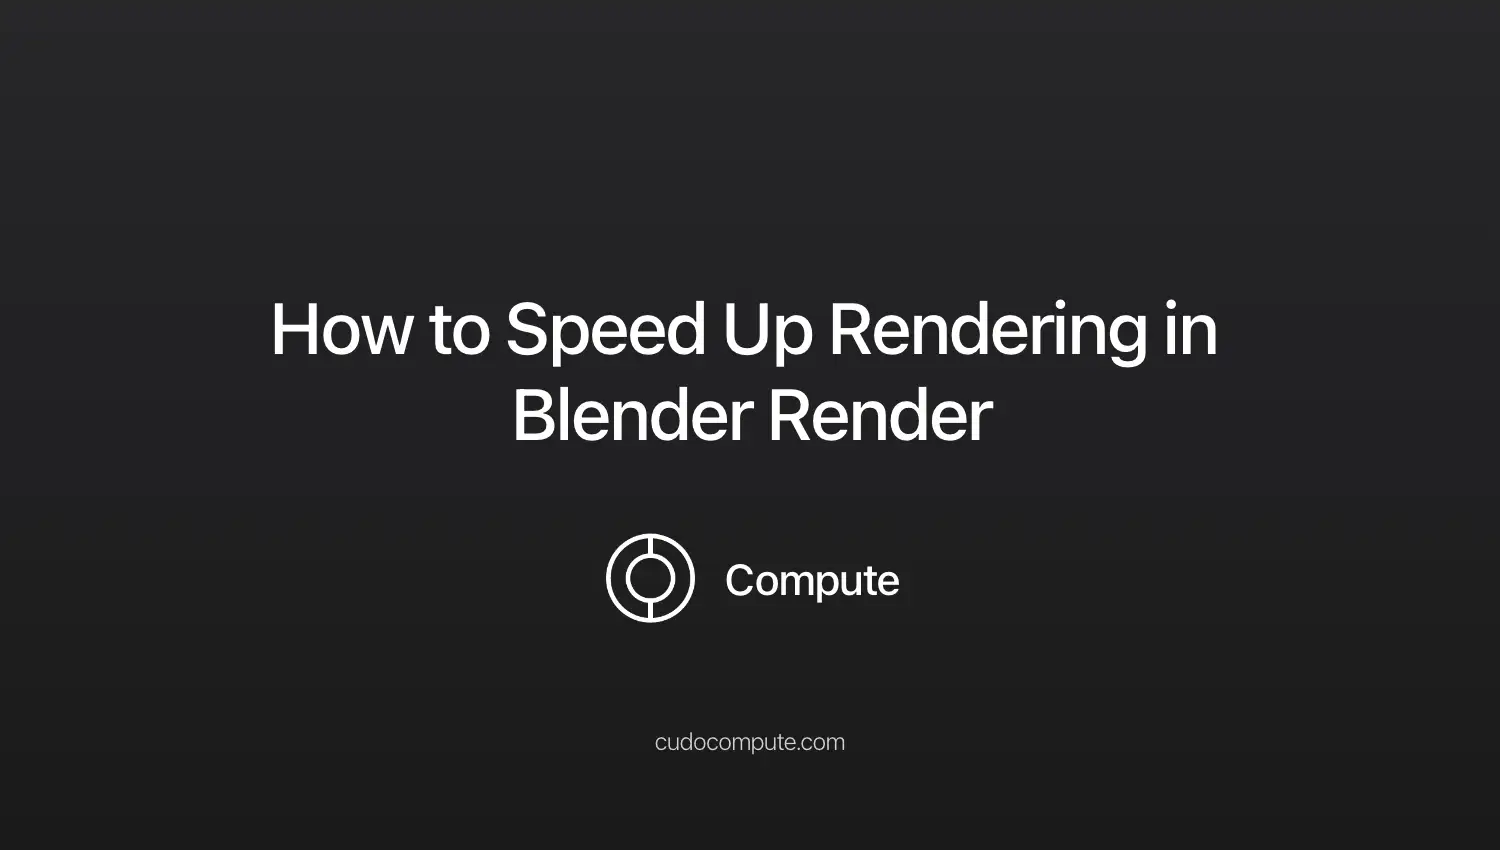 How to Speed Up Rendering in Blender Render cover photo